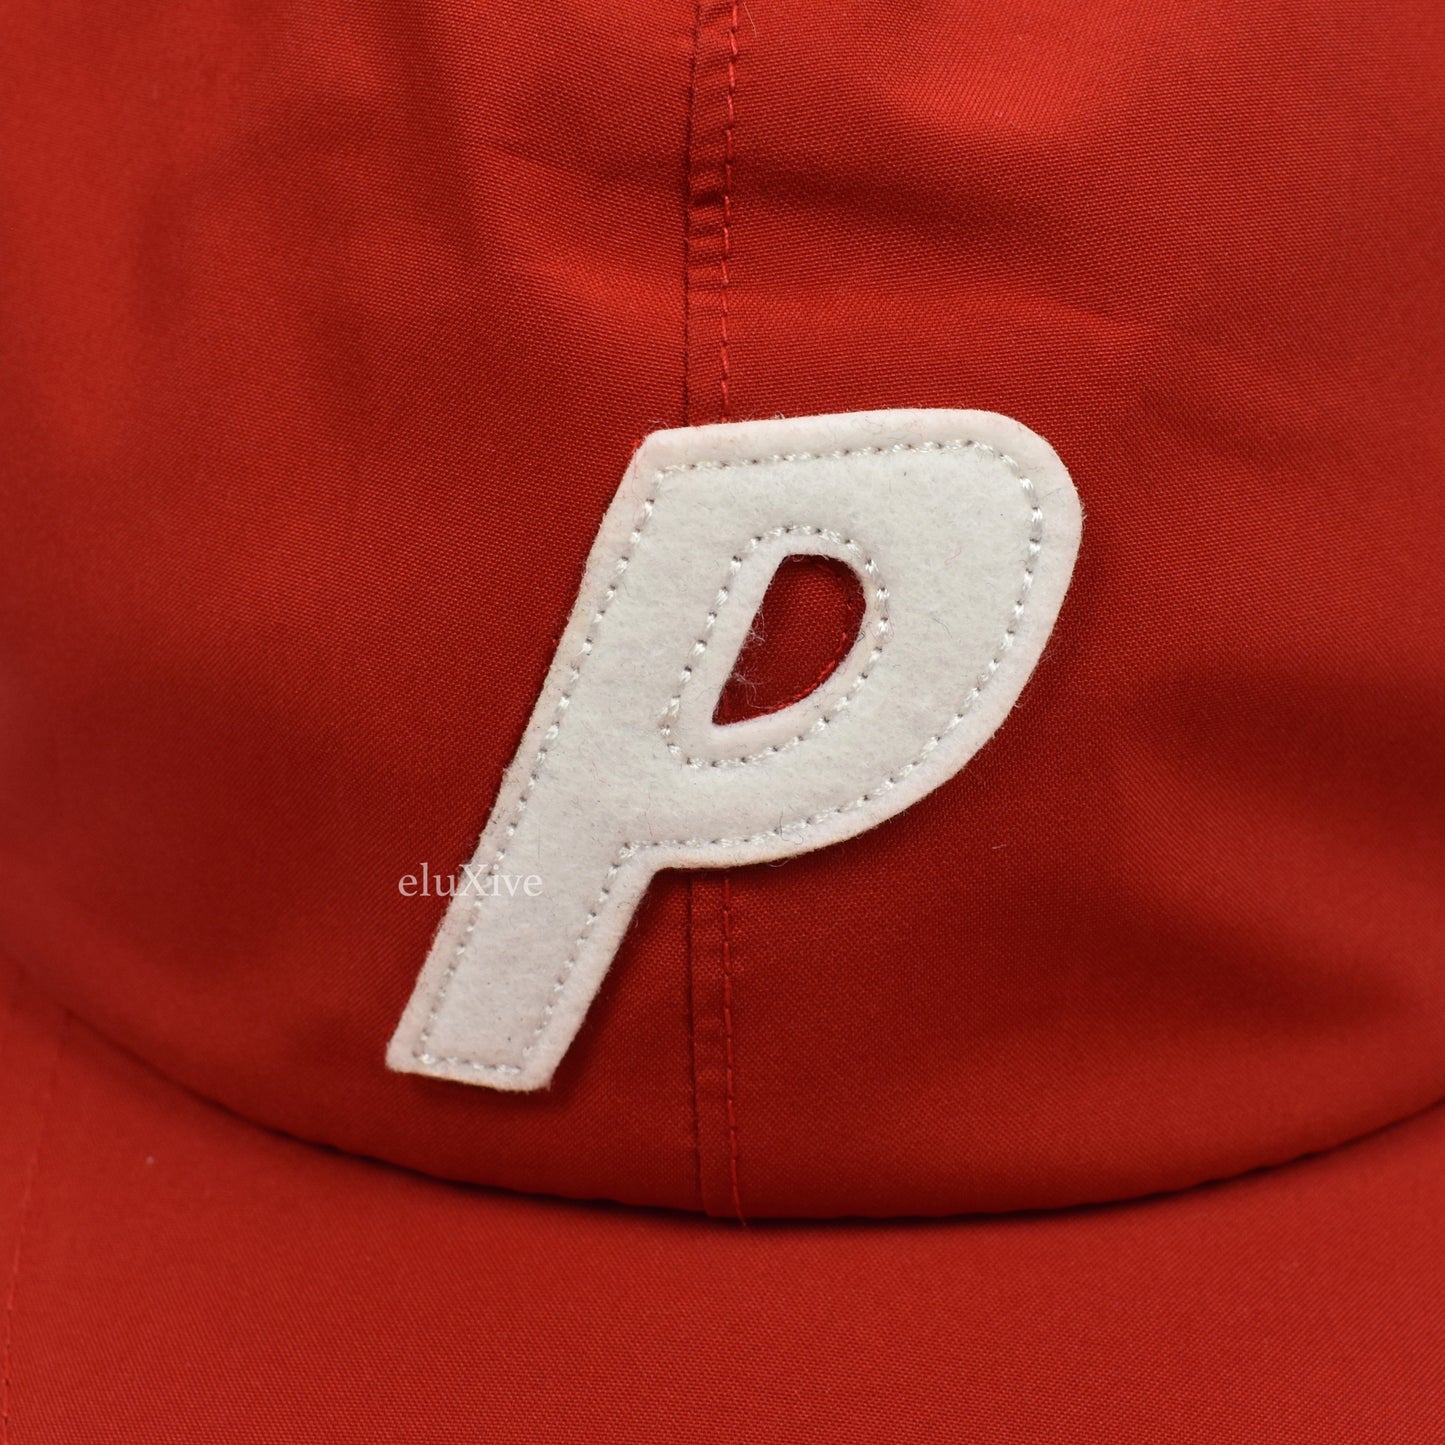 Palace - Gore-Tex P-Logo Hat (Red)